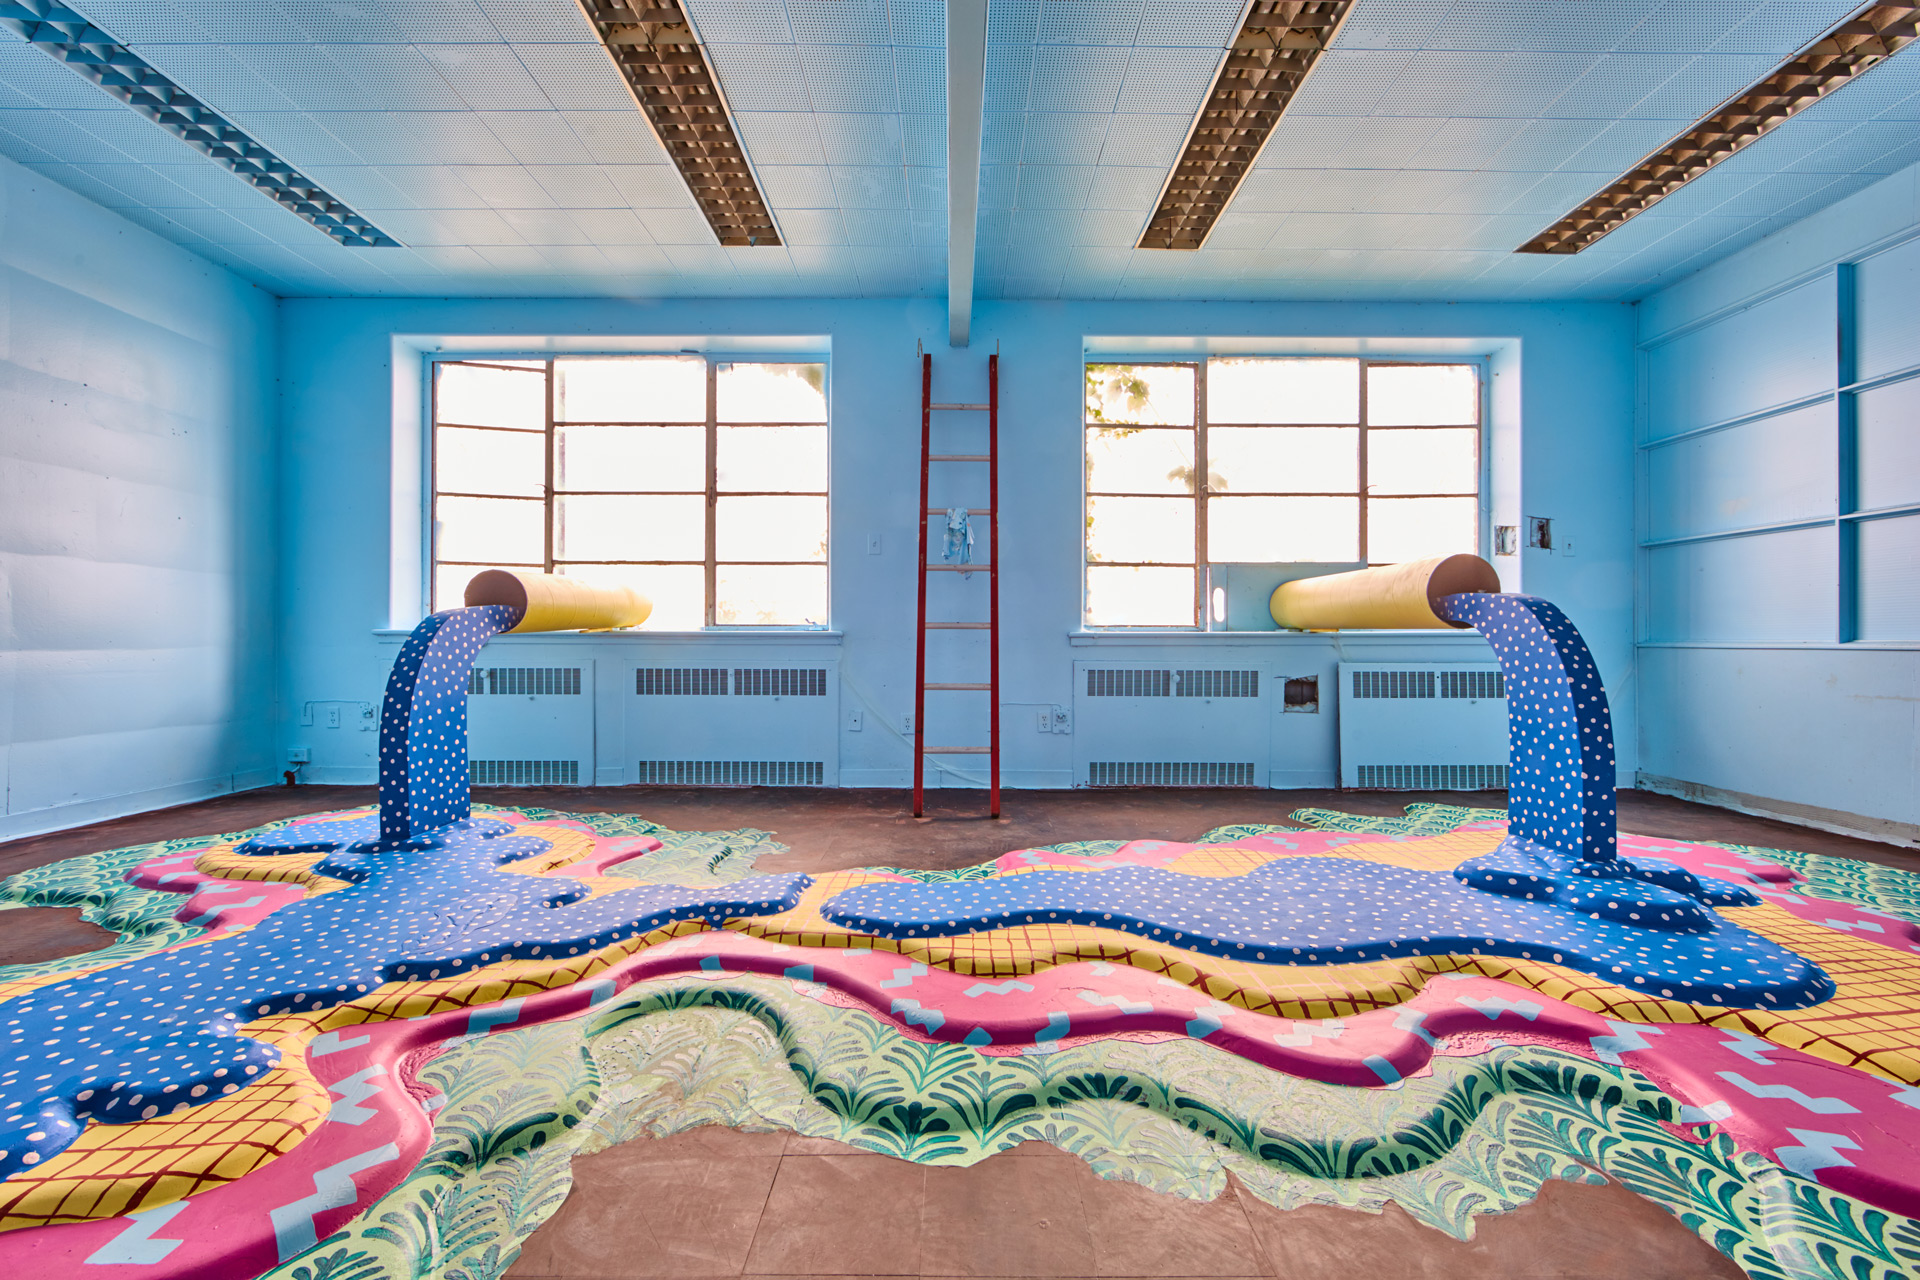 Photo of abstract are pieces featuring two pipes with colourful liquid pouring onto the floor